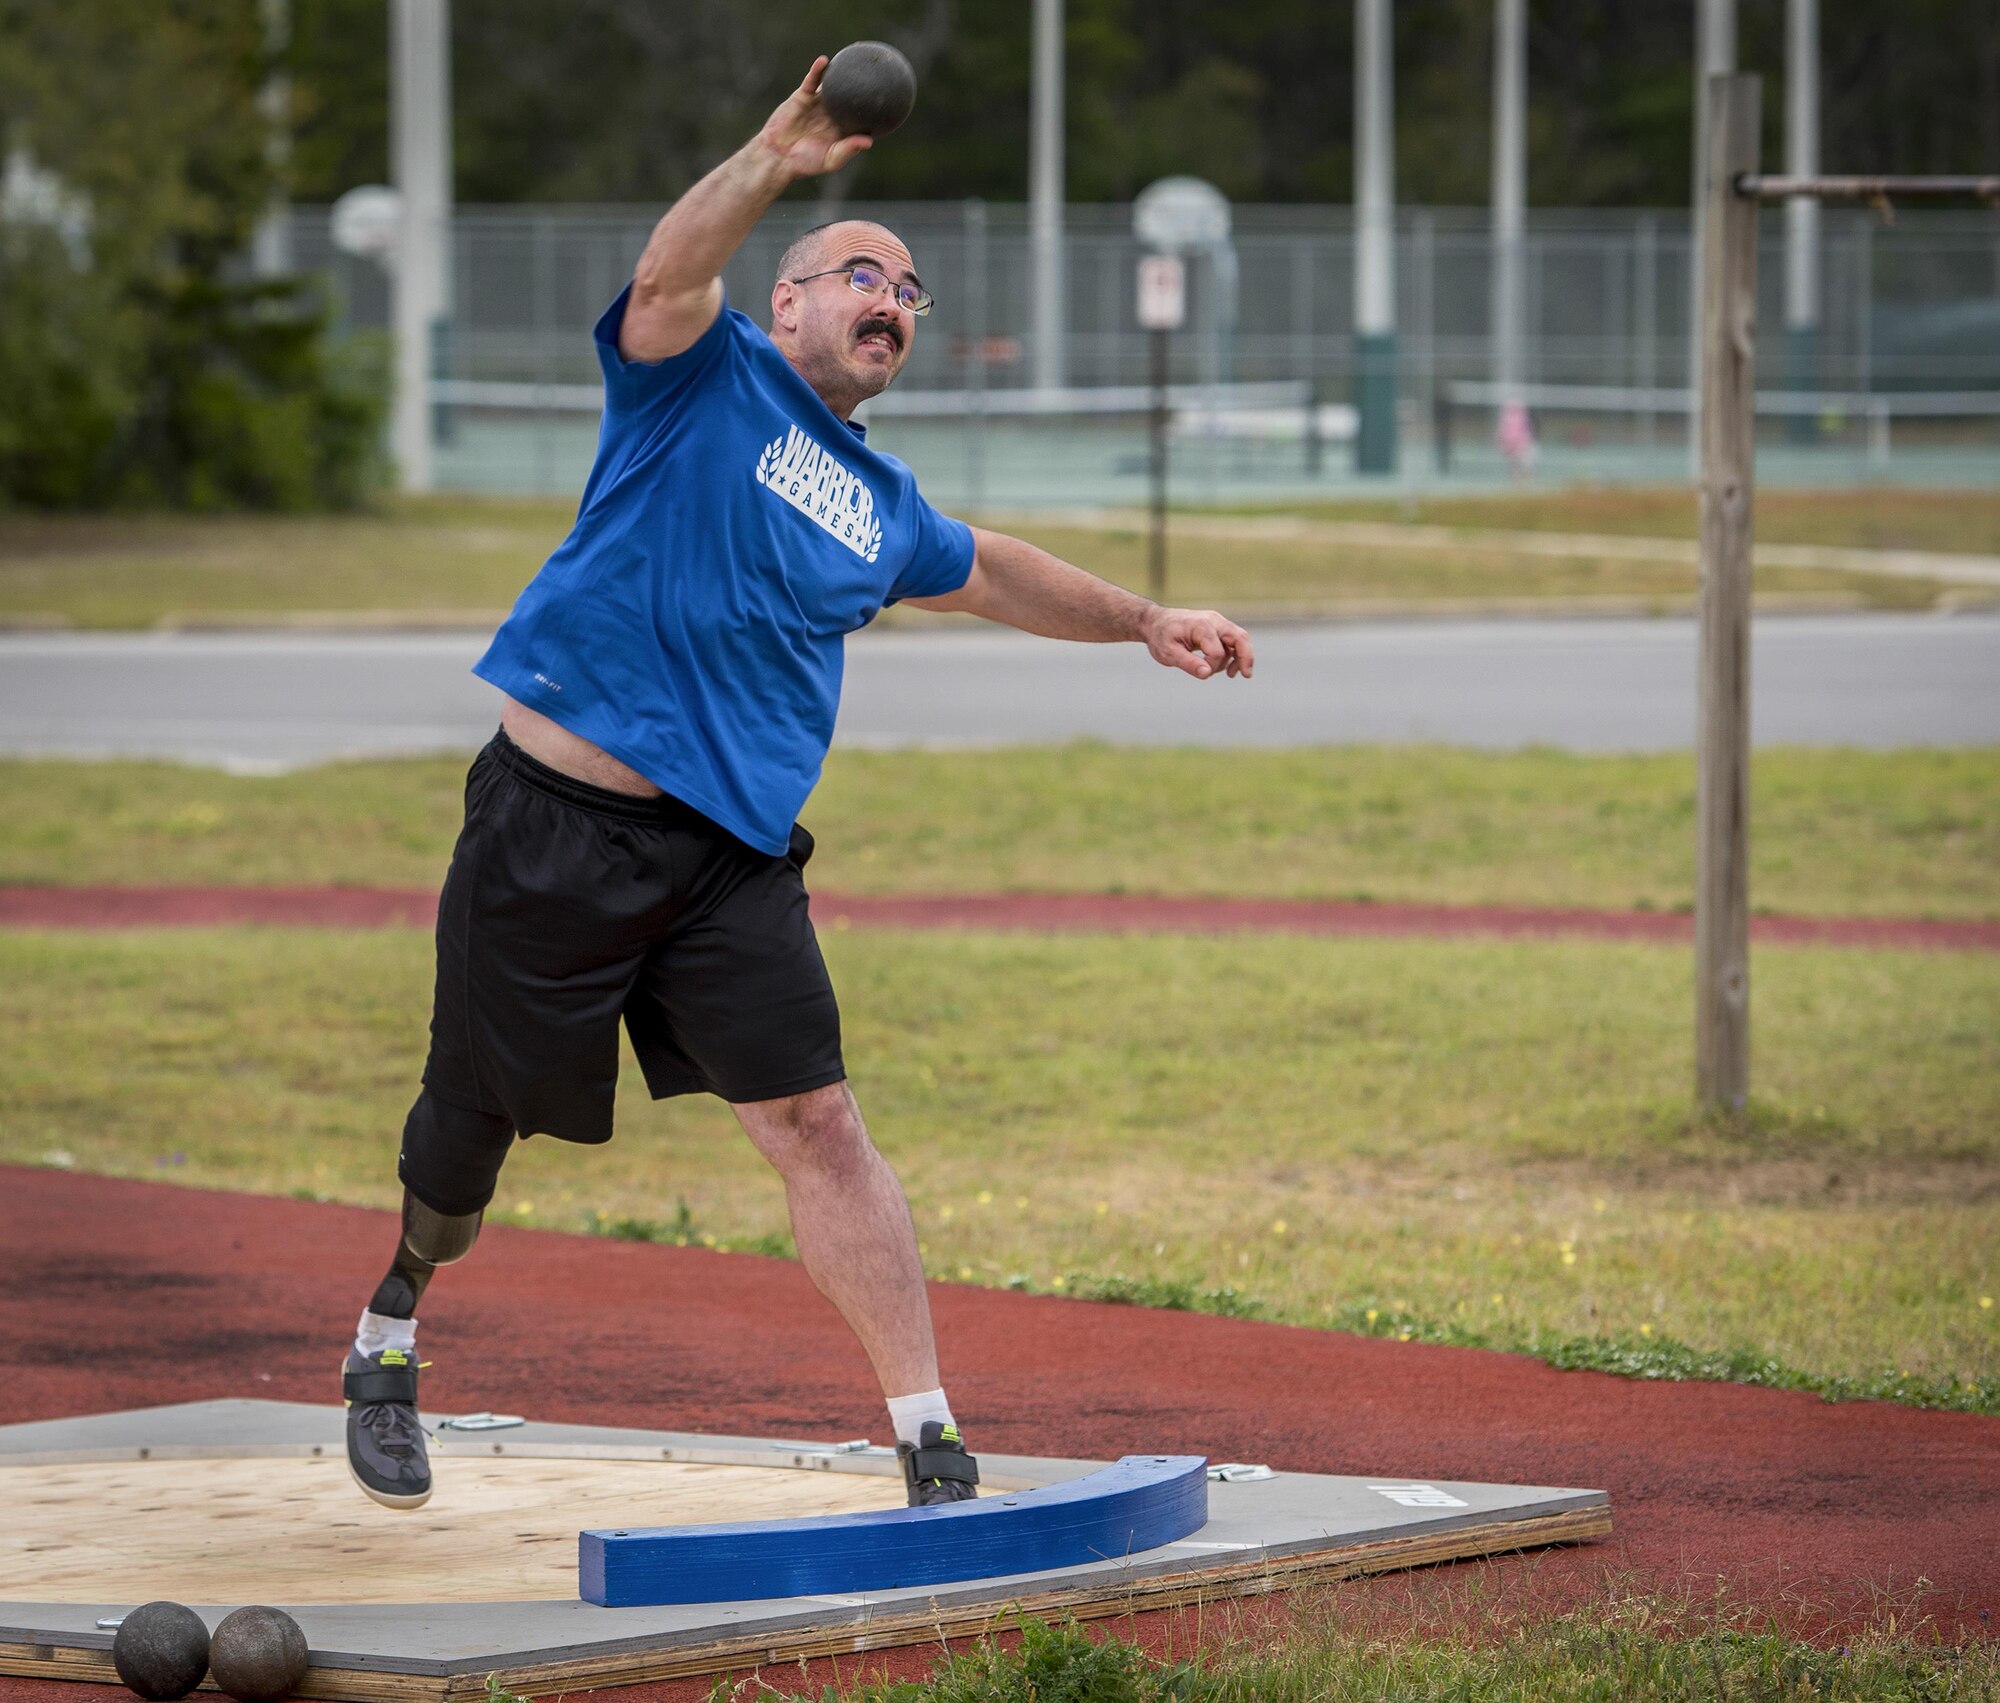 Tech. Sgt. Jason Caswell, a Warrior Games athlete, releases his toss during a morning track and field session at the Air Force team’s training camp at Eglin Air Force Base, Fla., April 24. The base-hosted, week-long Warrior Games training camp is the last team practice session before the yearly competition in June. (U.S. Air Force photo/Samuel King Jr.)